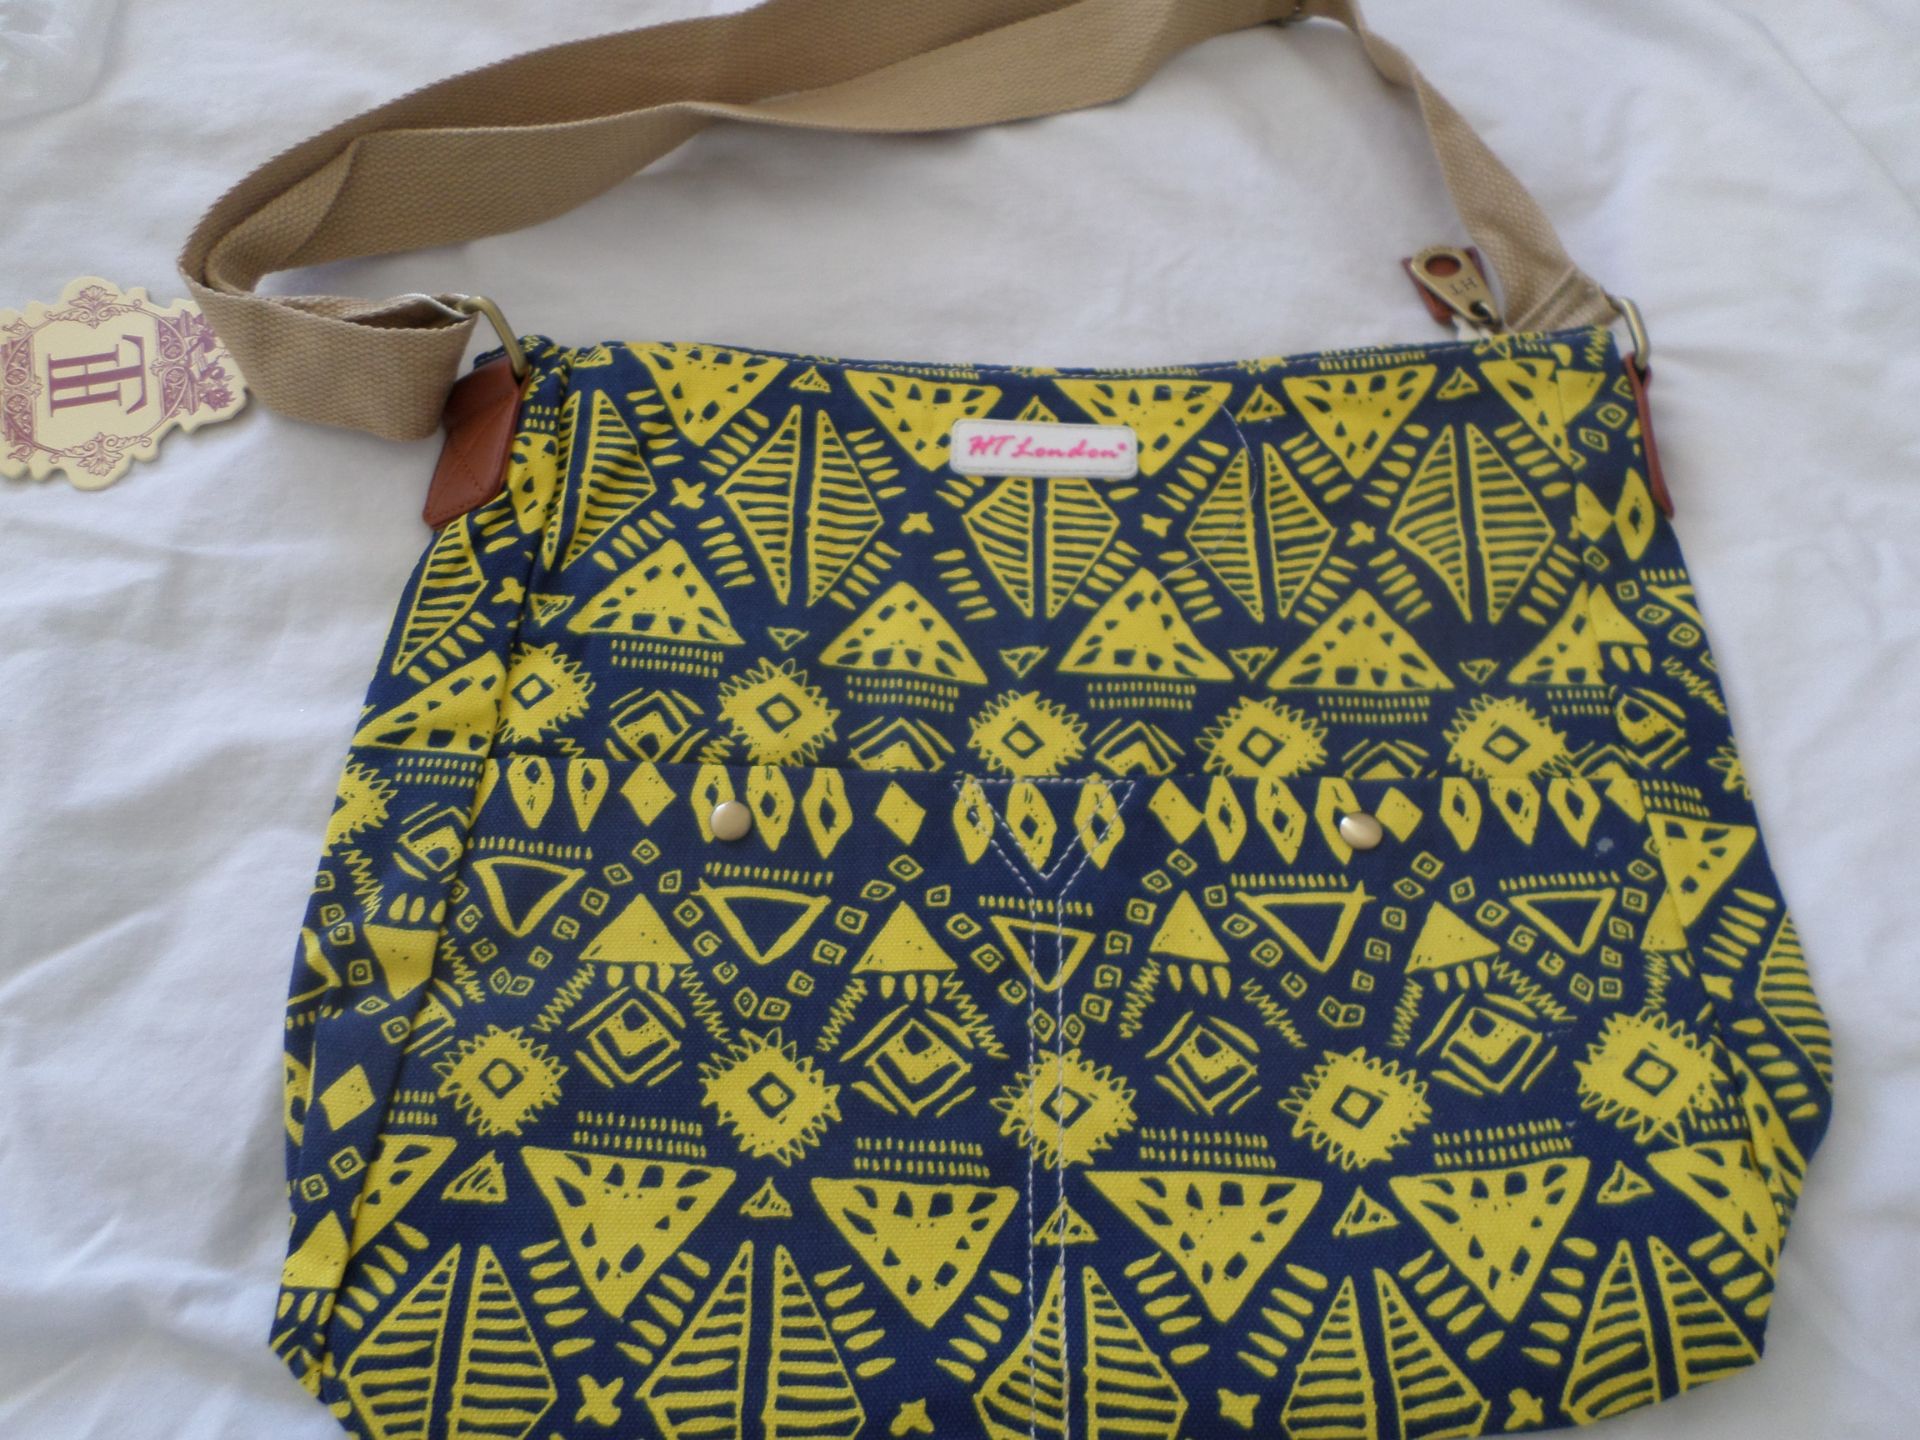 HT London Large Shoulder/Tote Bag. Brand New. RRP £19.99 Each - Image 2 of 3